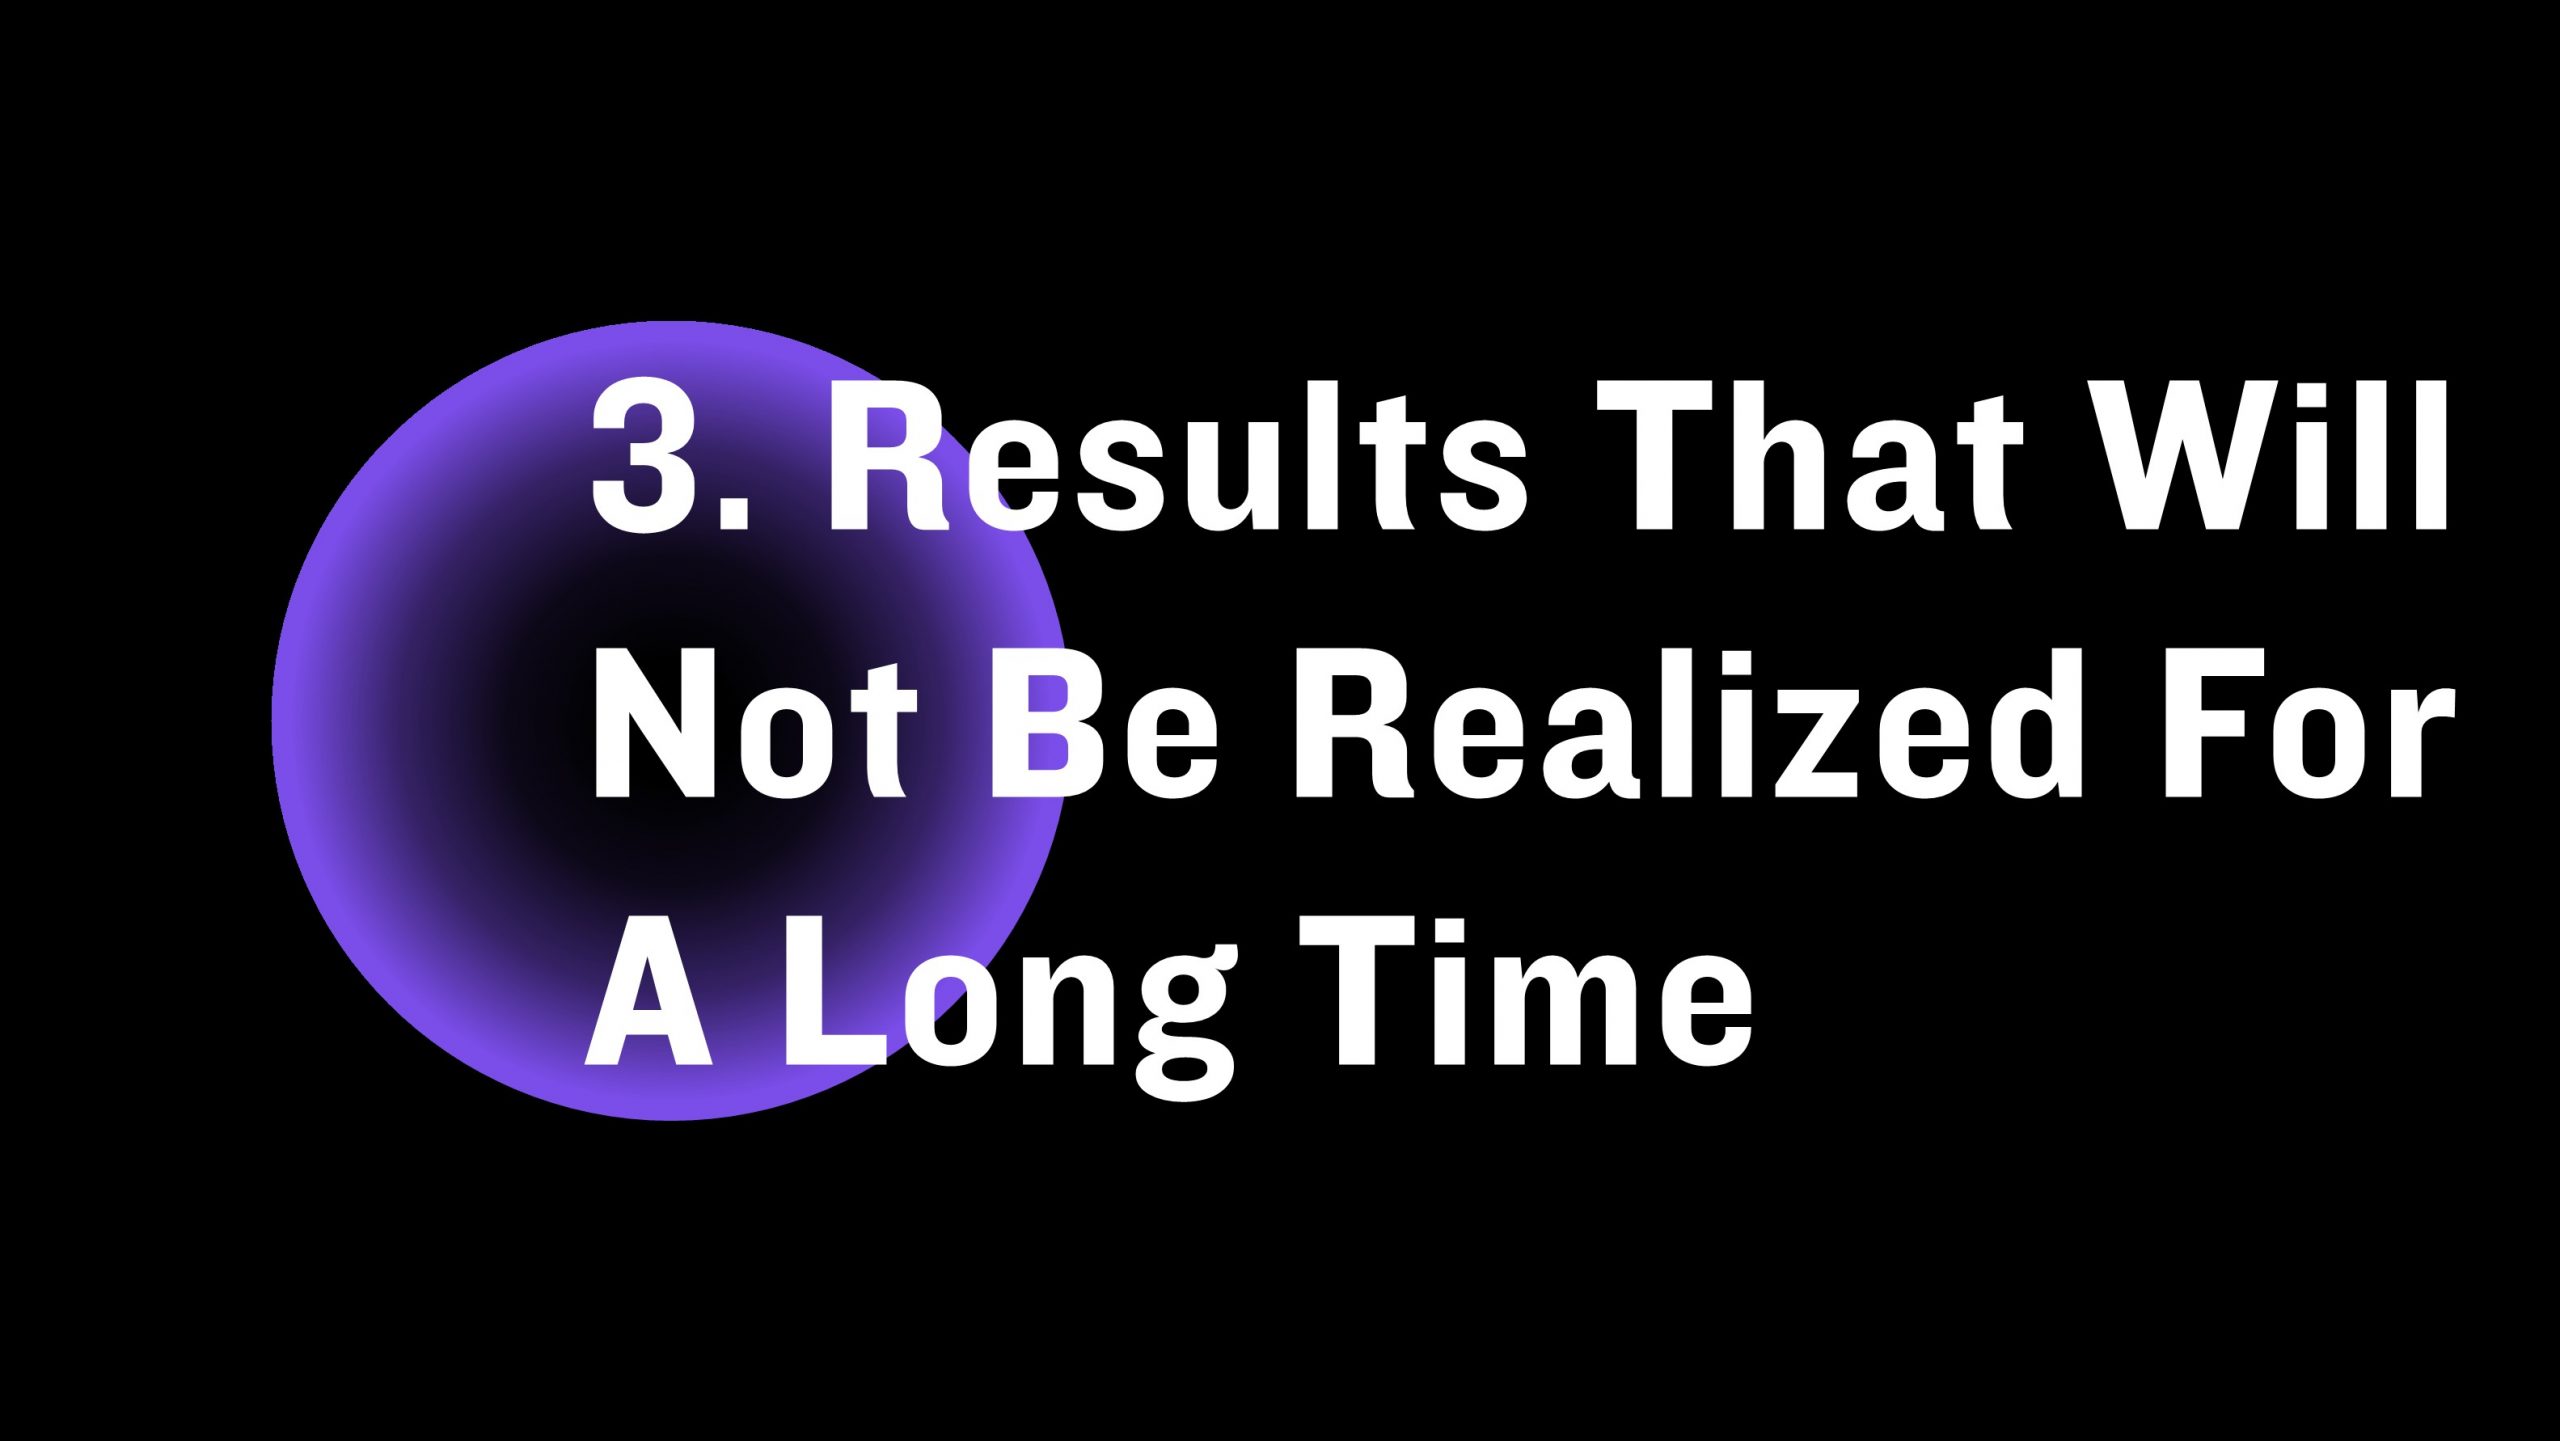 Results will not be realized for a long time